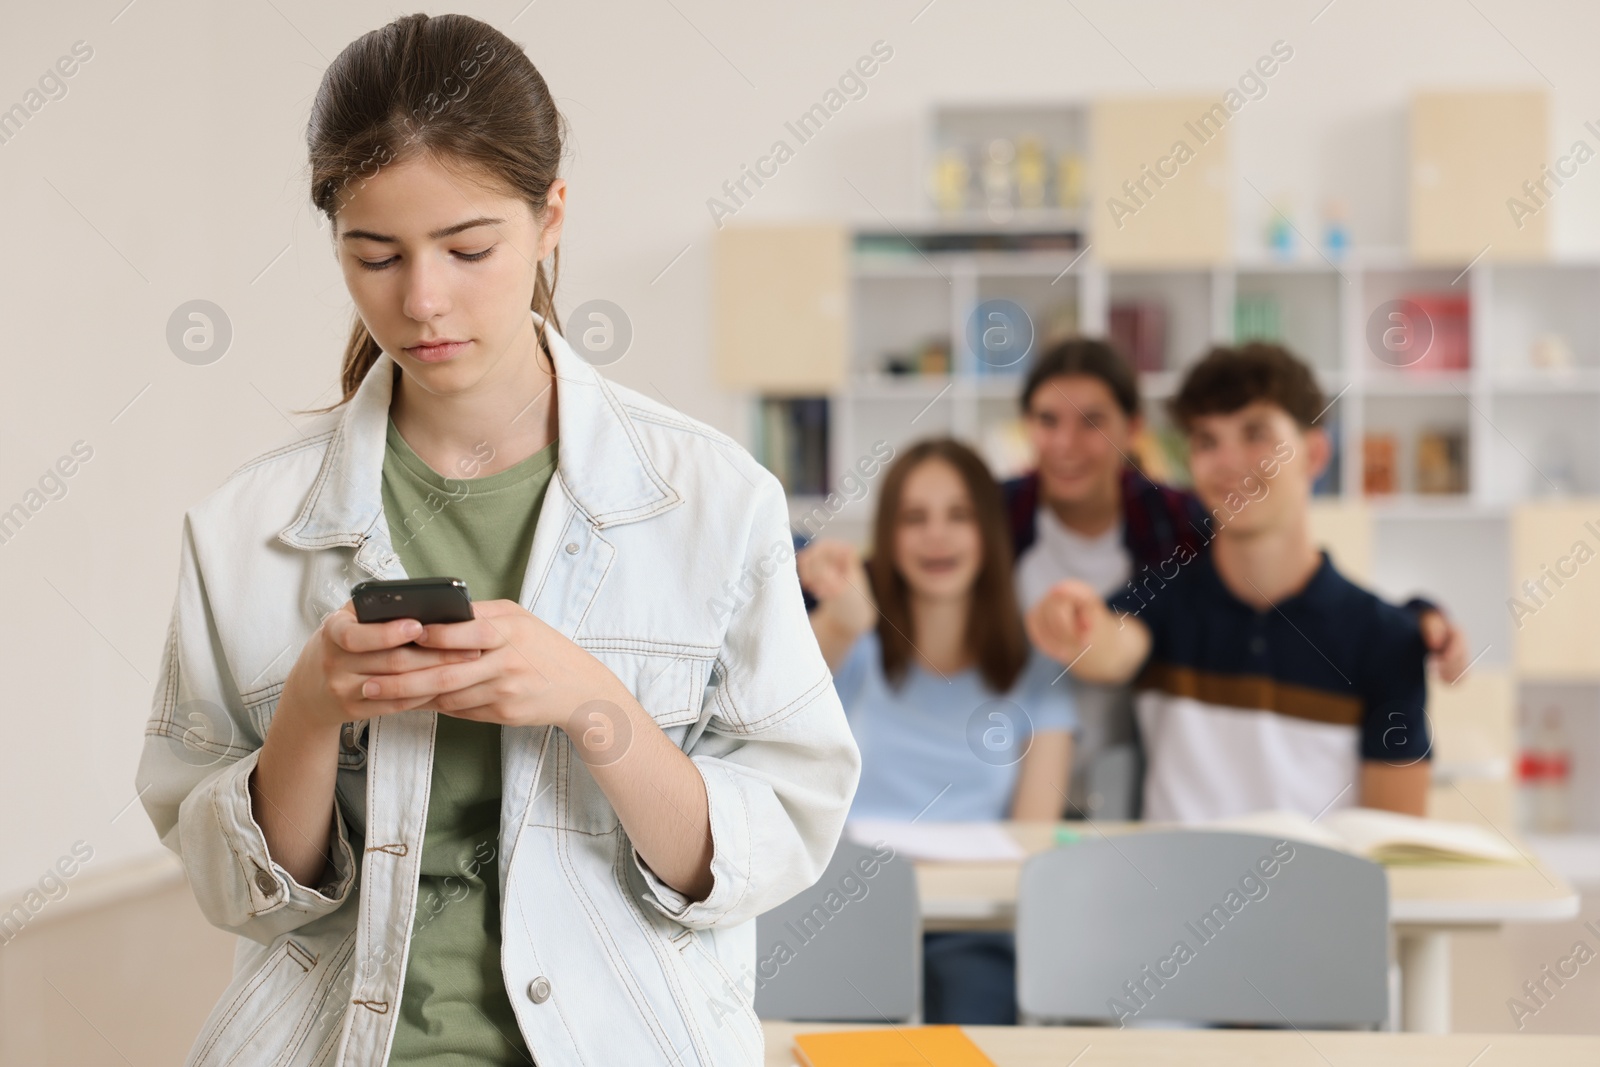 Photo of Teen problems. Lonely girl with smartphone standing separately from other students in classroom